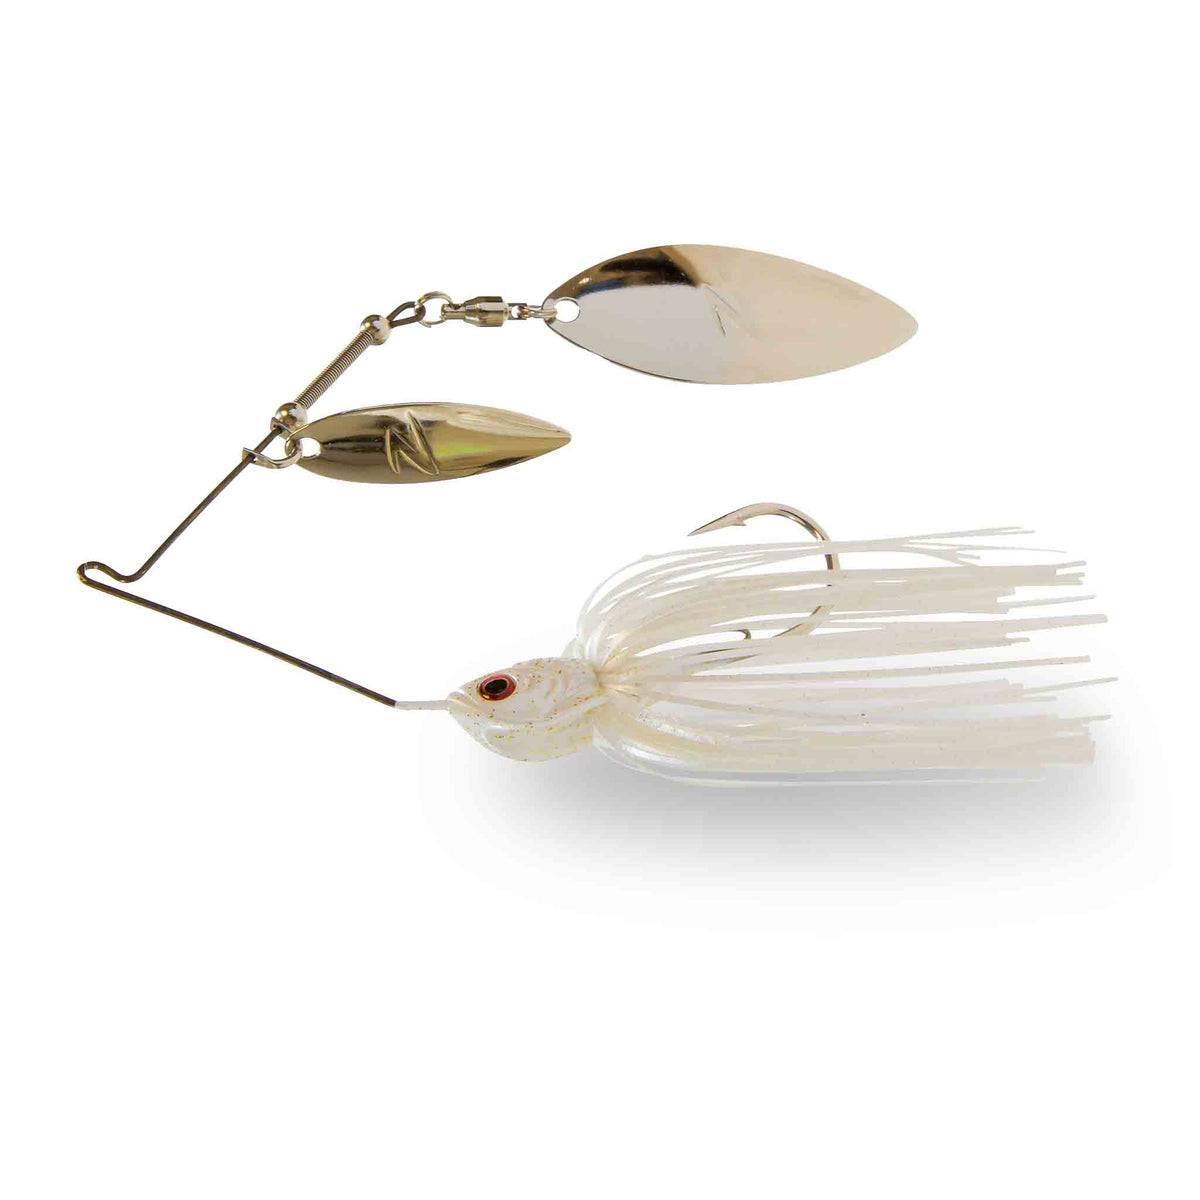 Z-Man SlingBladeZ Double Willow (3/4oz) Pearl Ghost Spinnerbaits